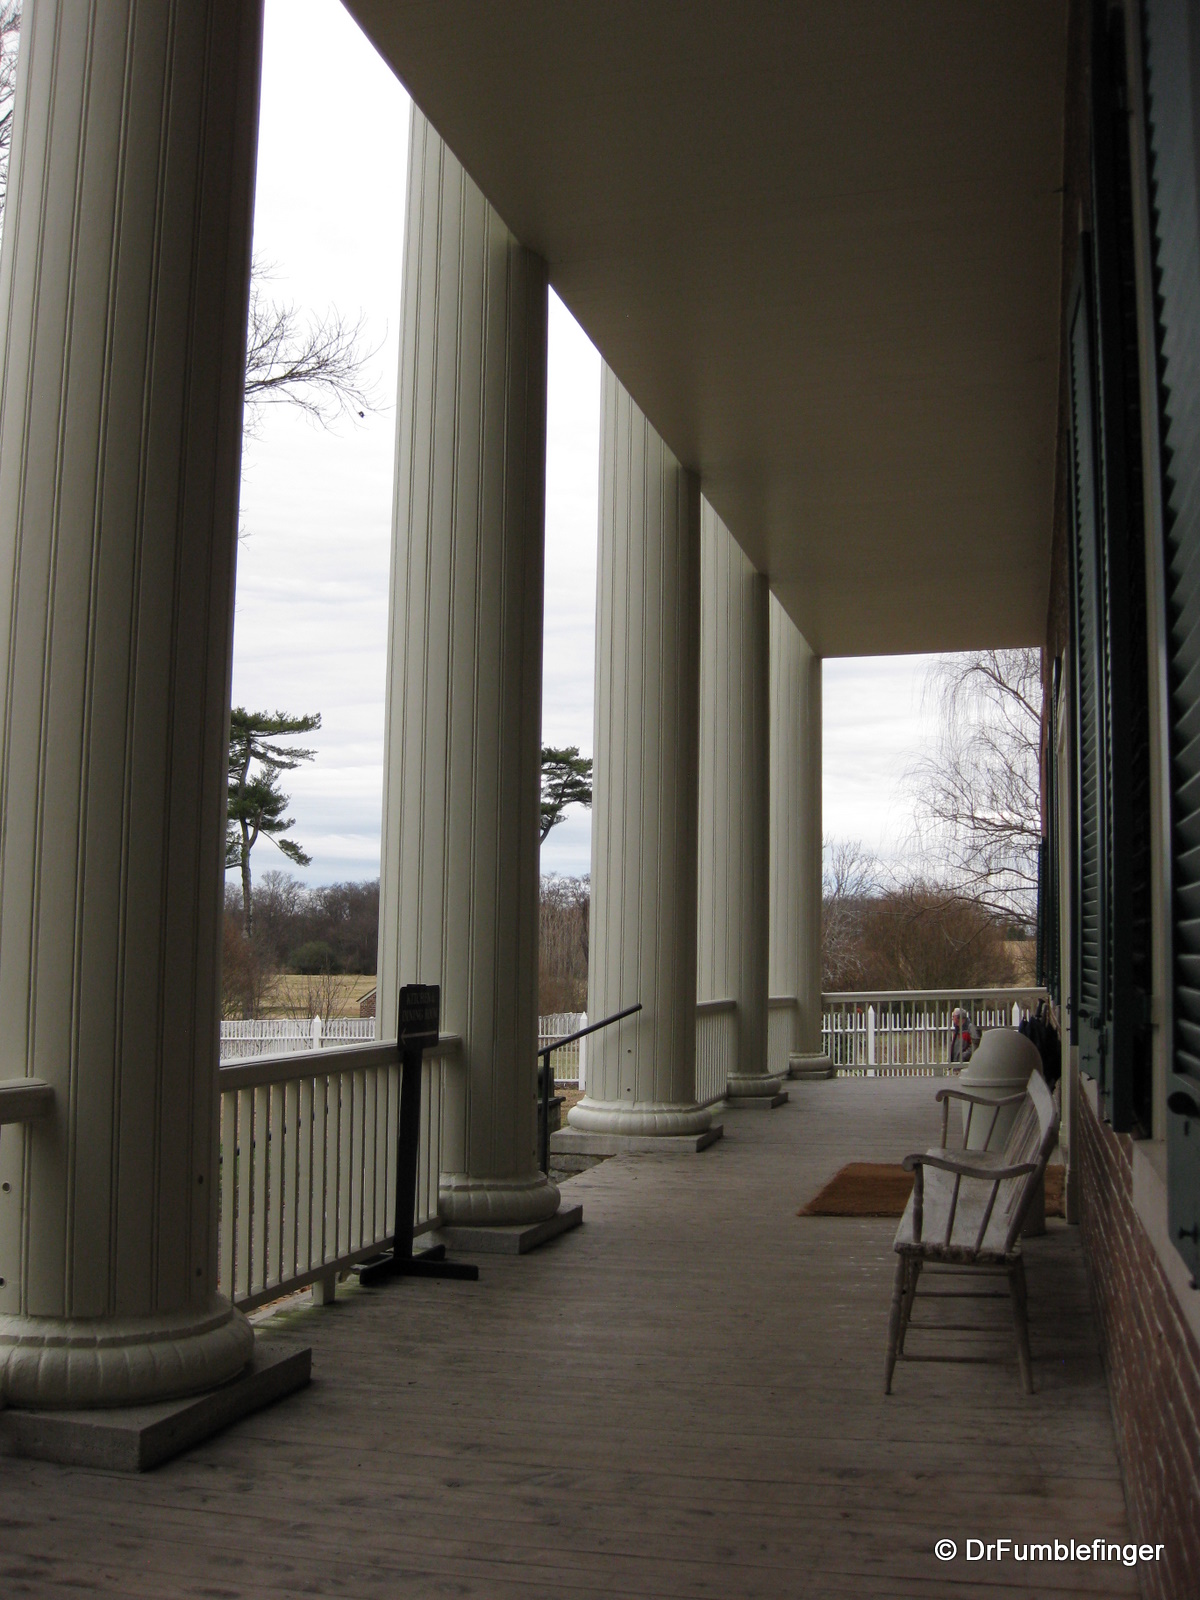 Back porch of the Hermitage